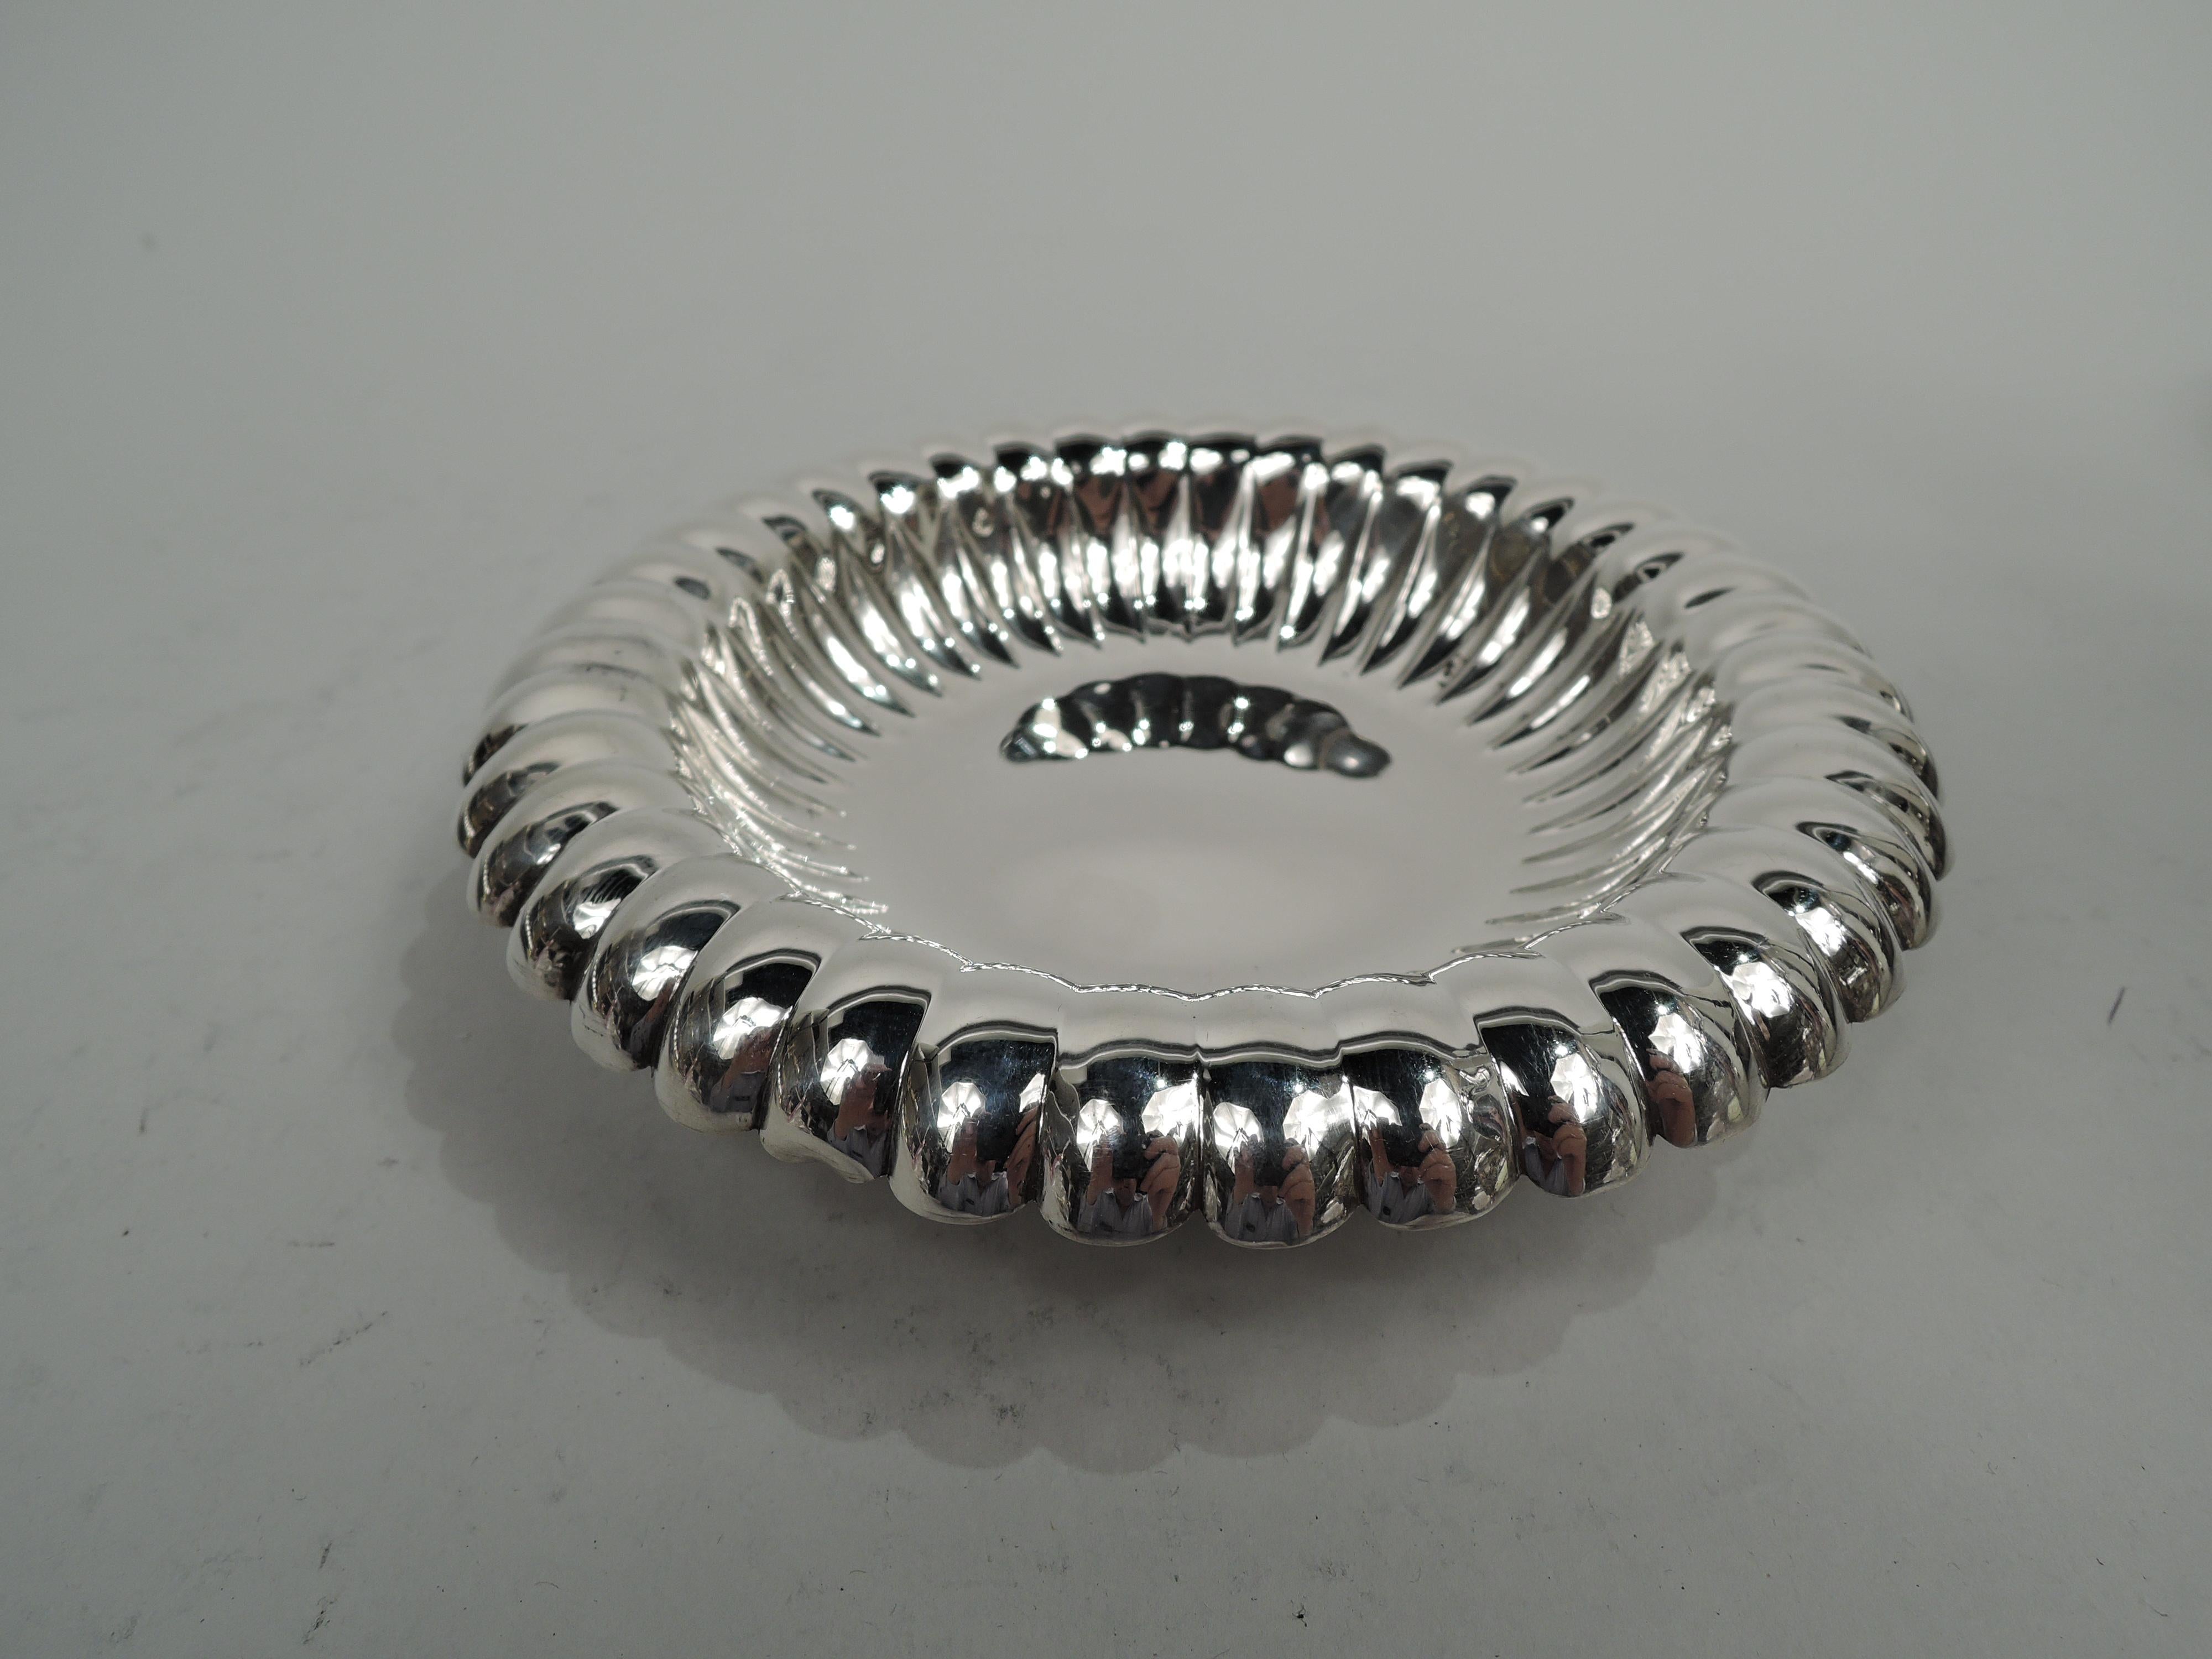 Pair of Victorian Classical sterling silver bowls. Made by Tiffany & Co. in New York. Each: Round with plain well and curved and fluted sides. Turned-down lobed rim. Four ball supports Fully marked including maker’s stamp, pattern no. 10374 (first